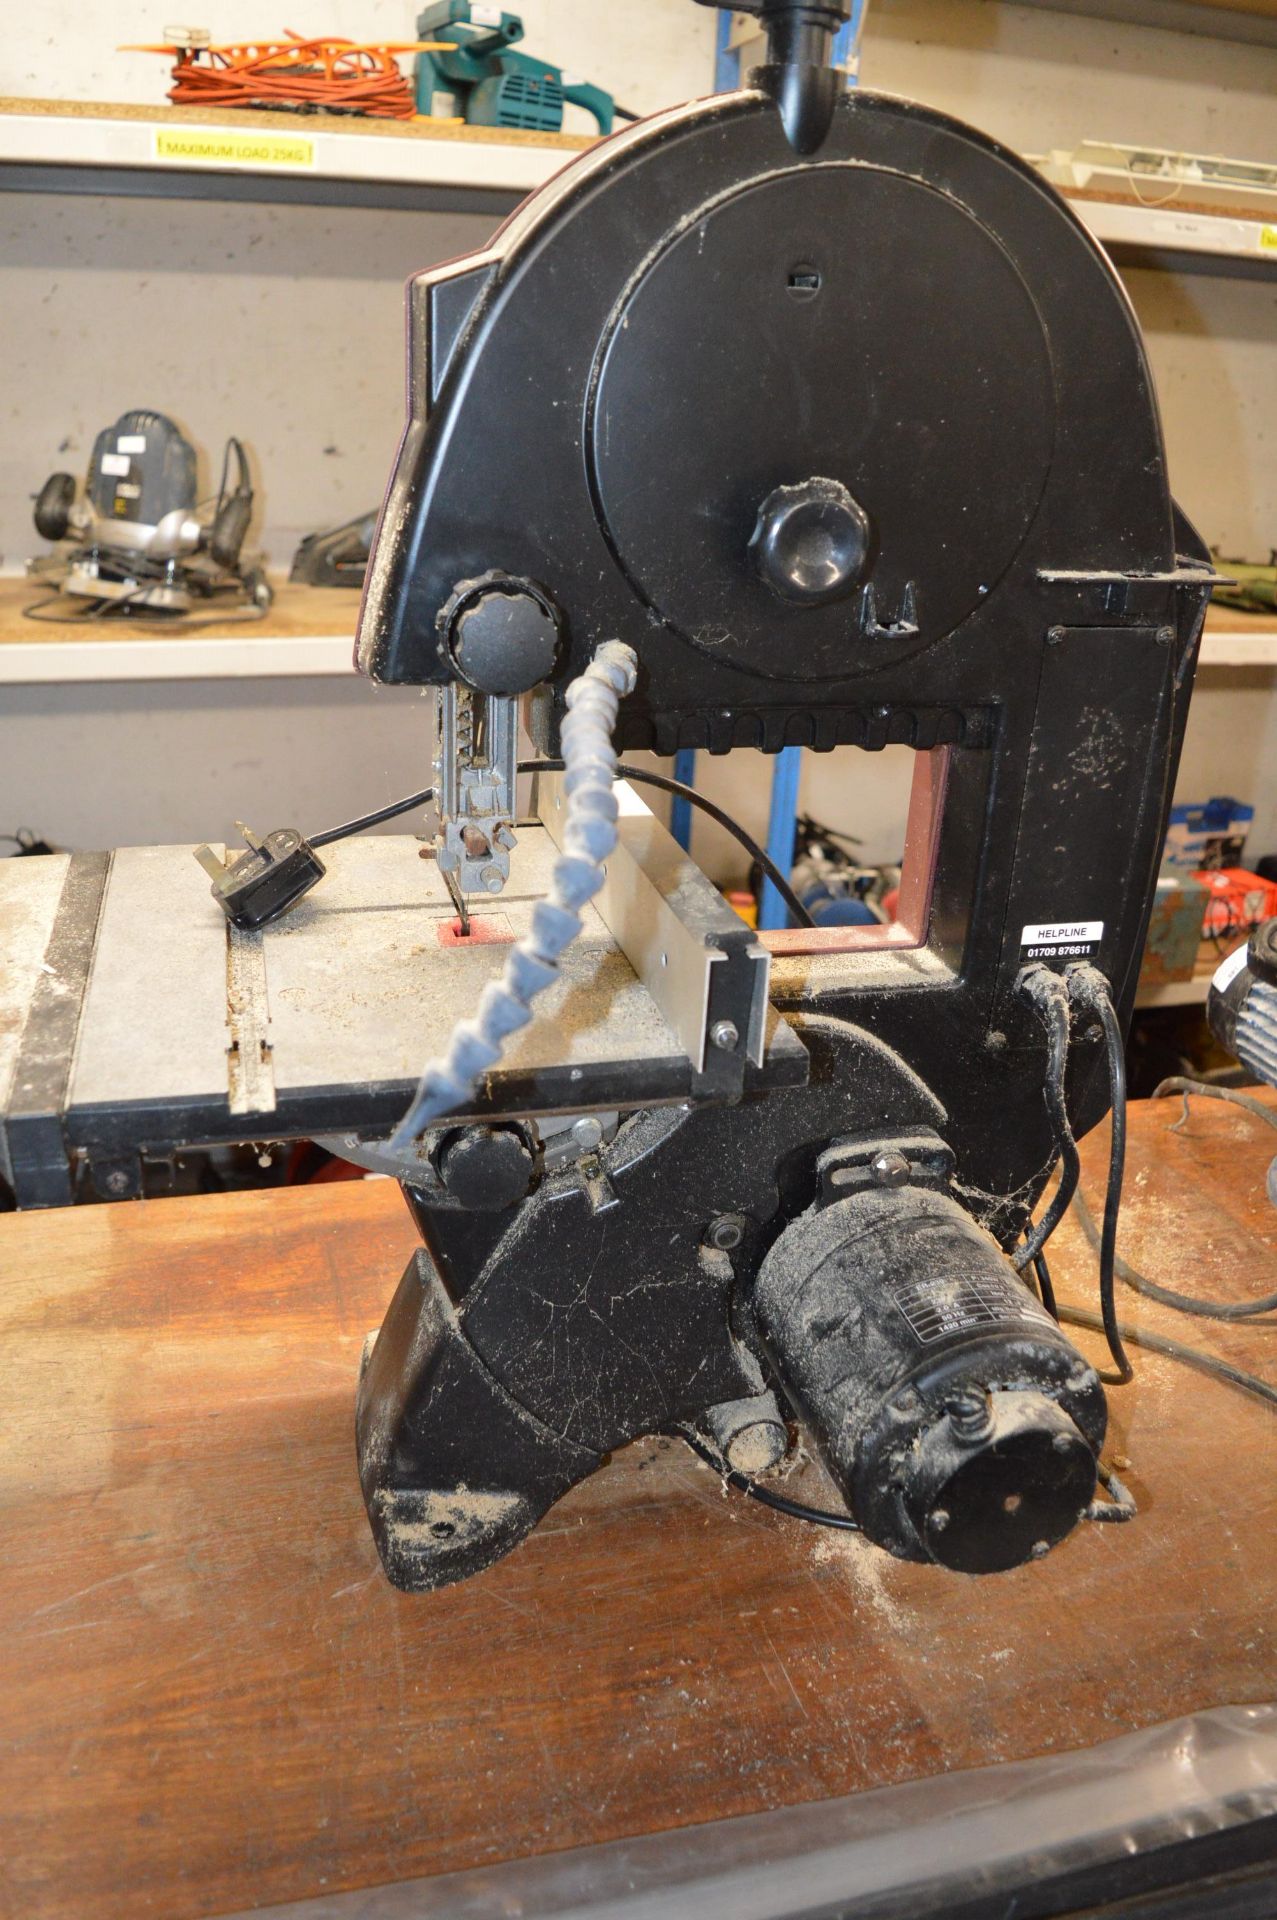 Rexon BS2301A Band Saw - Image 2 of 3